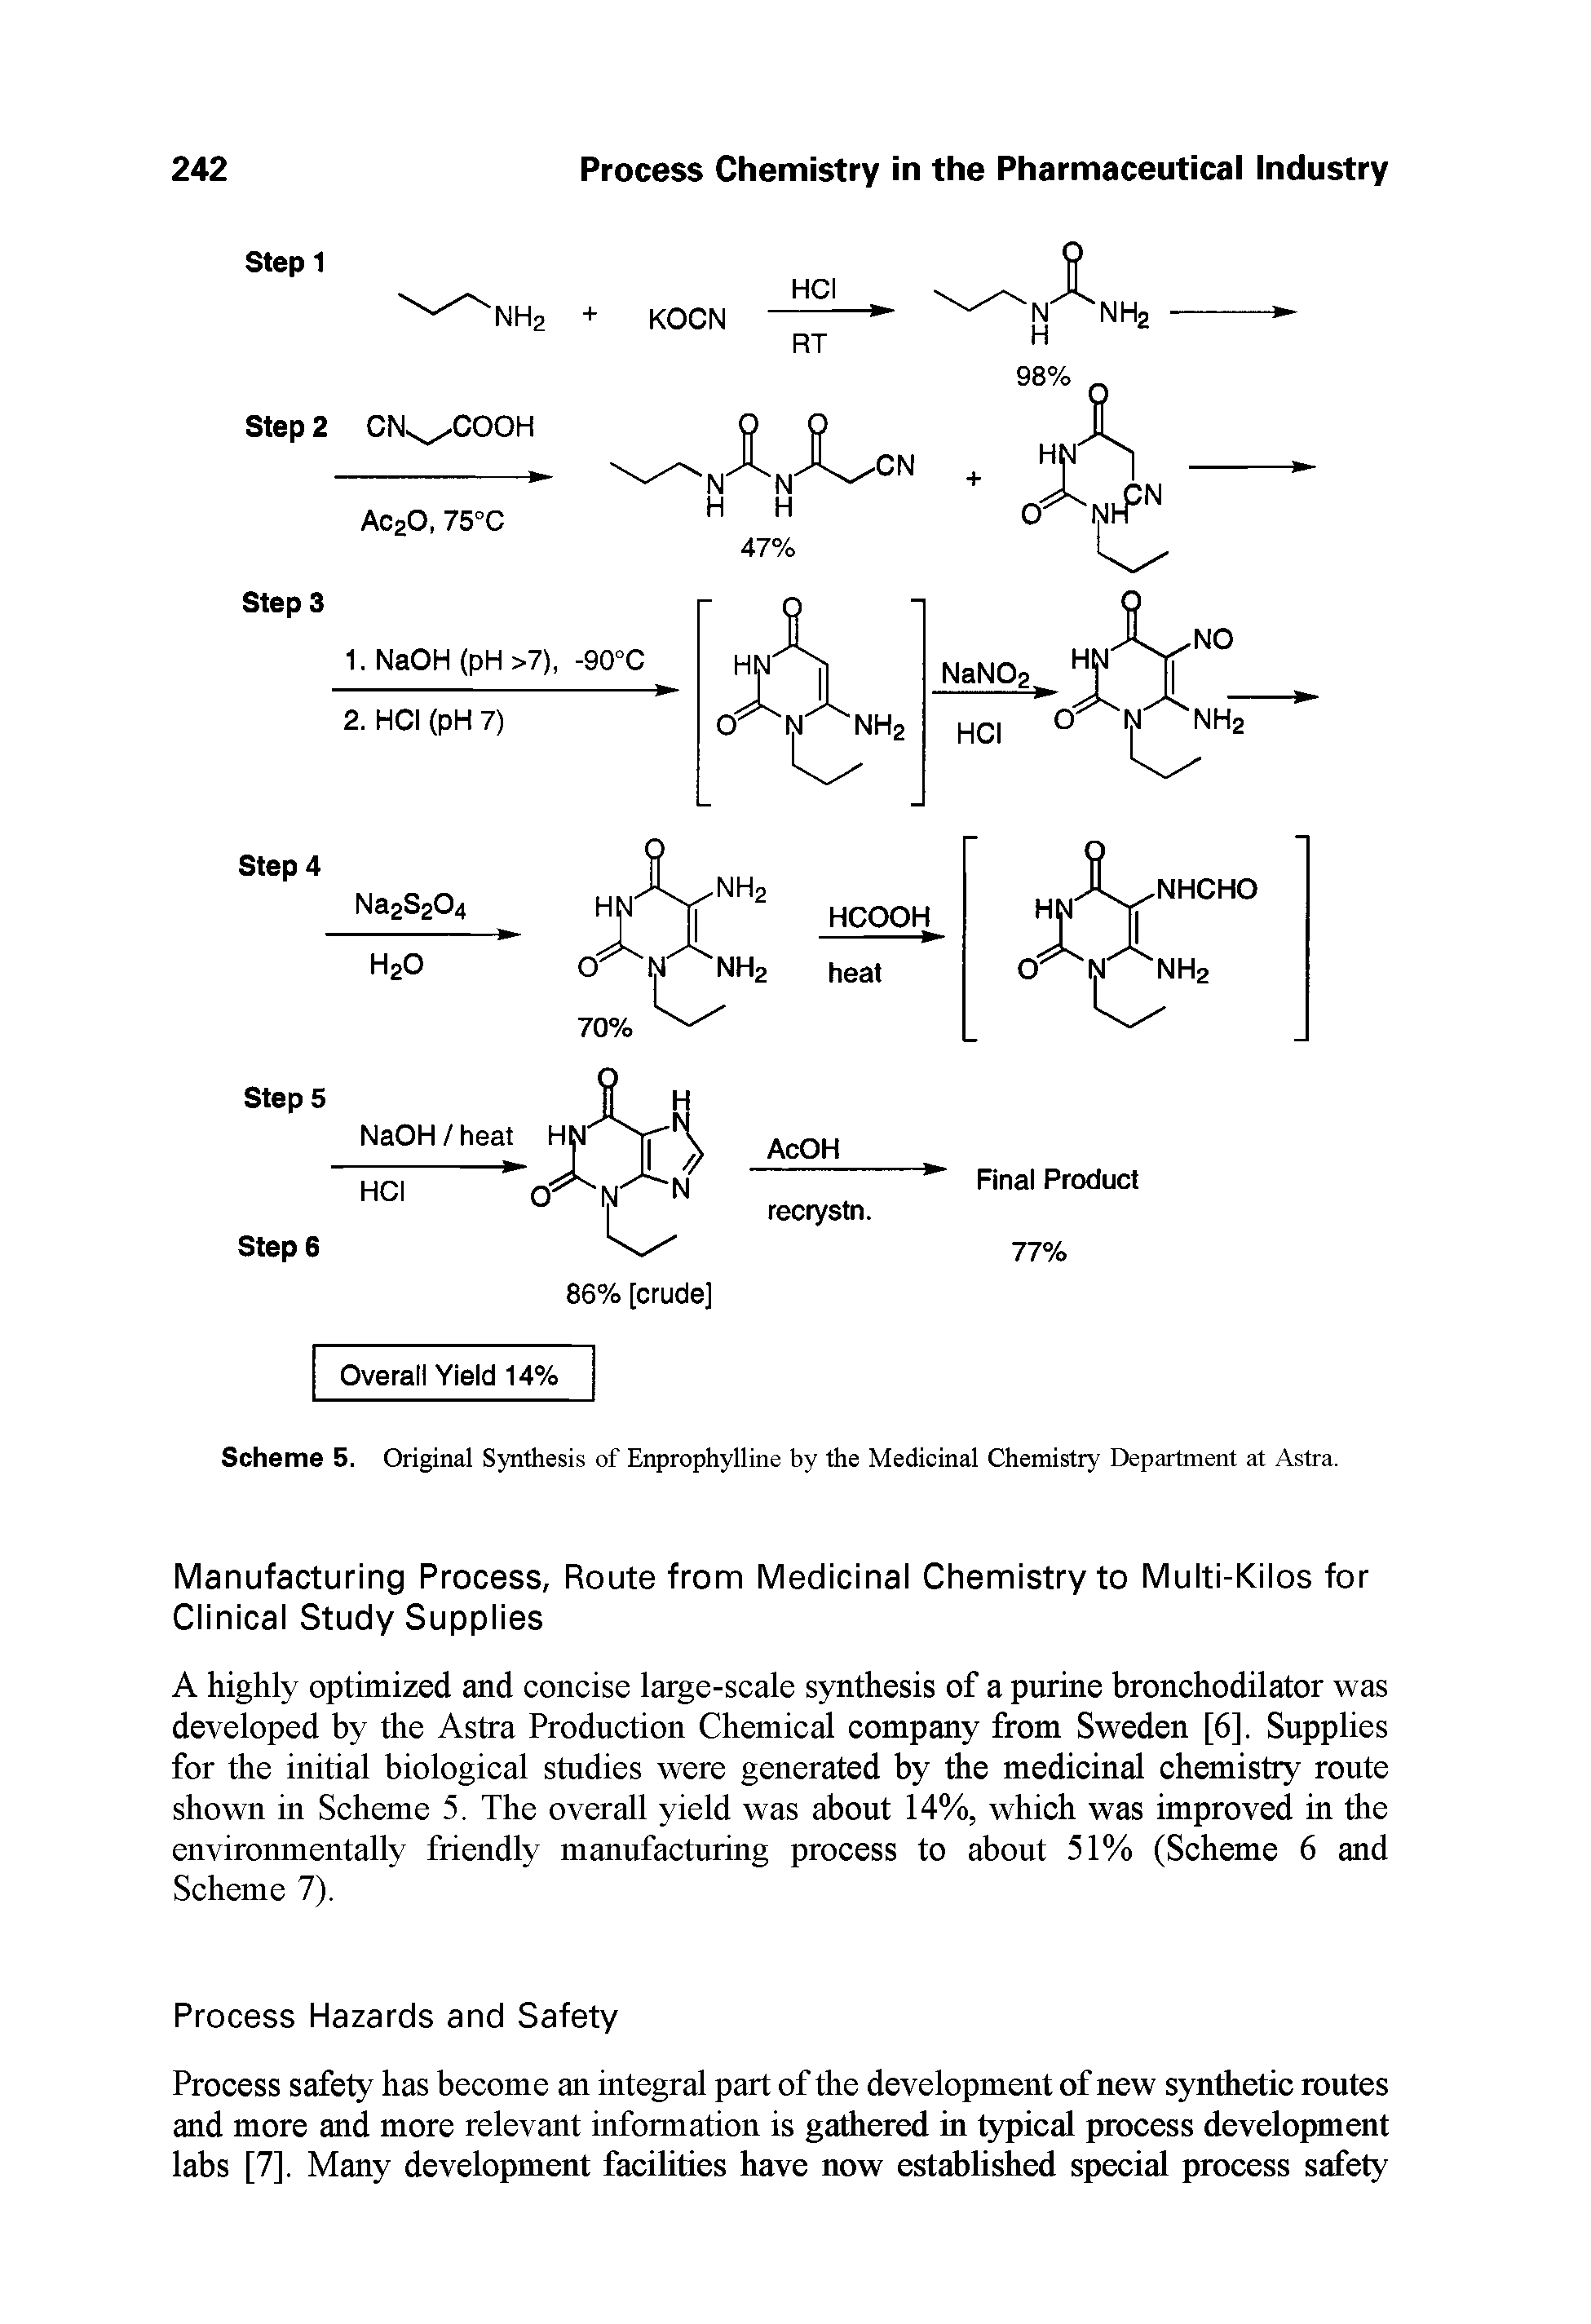 Scheme 5. Original Synthesis of Enprophylline by the Medicinal Chemistry Department at Astra.